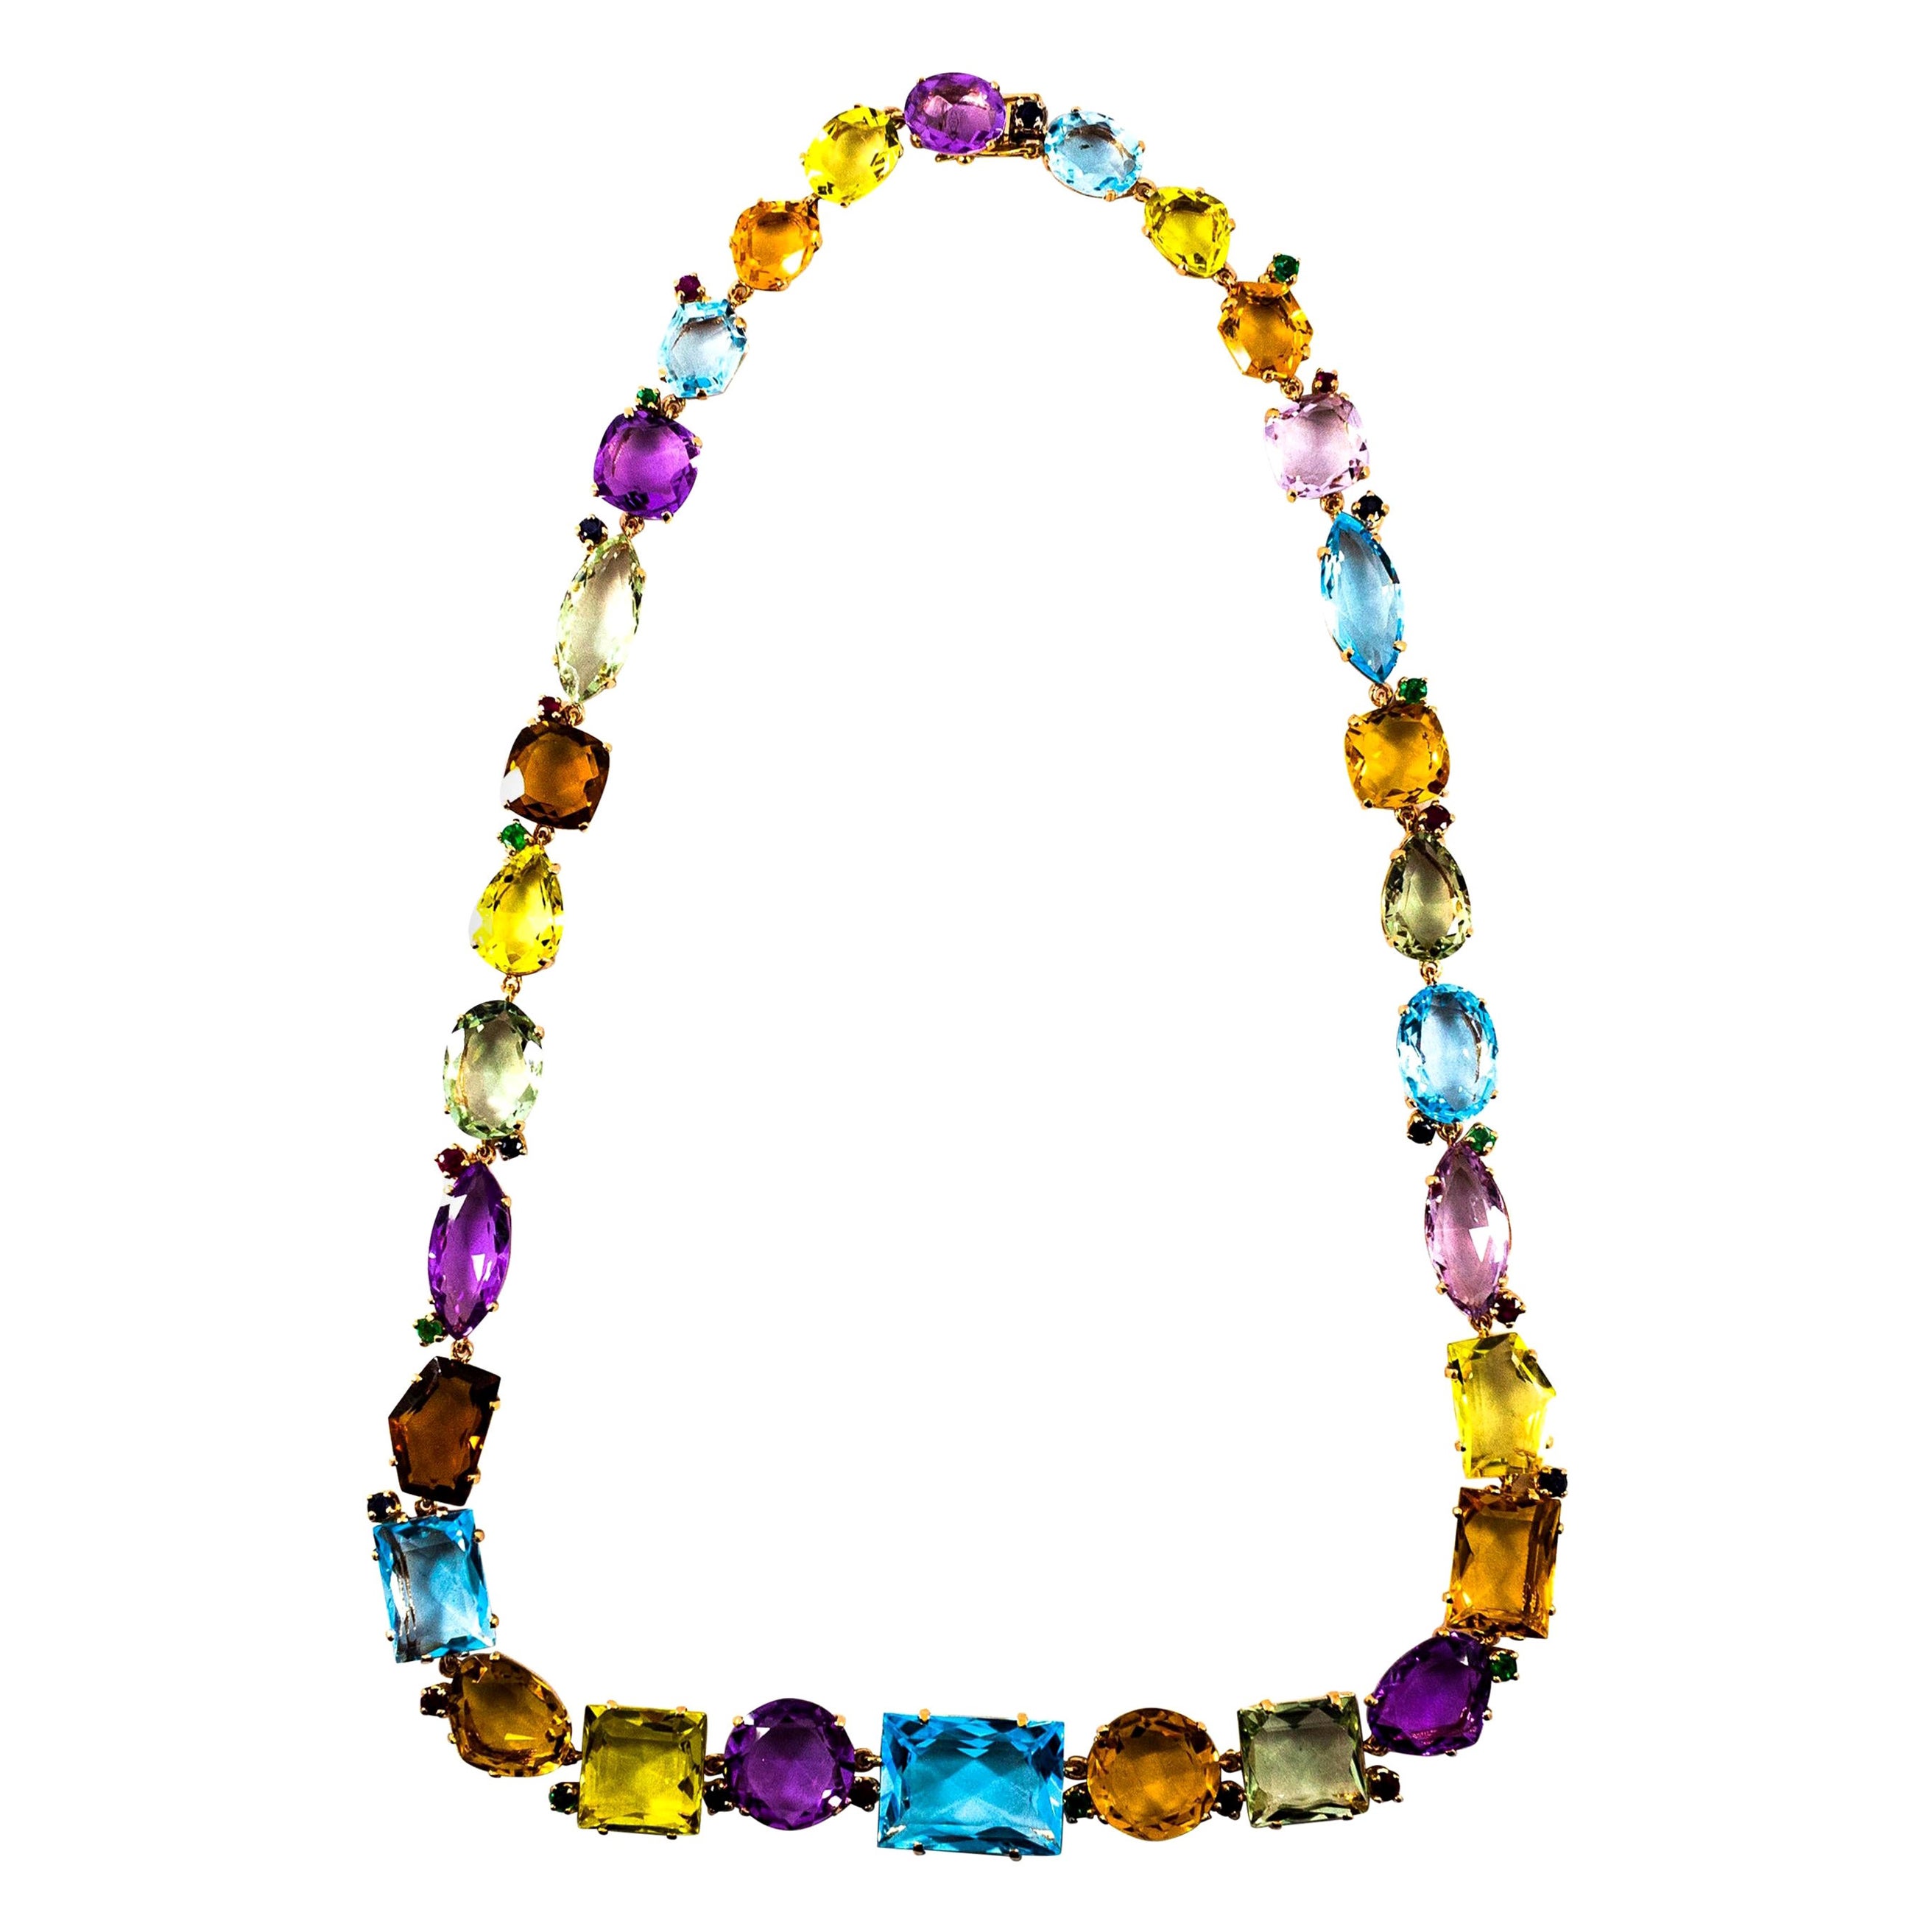 Art Deco Style Ruby Emerald Blue Sapphire Amethyst Citrine Yellow Gold Necklace